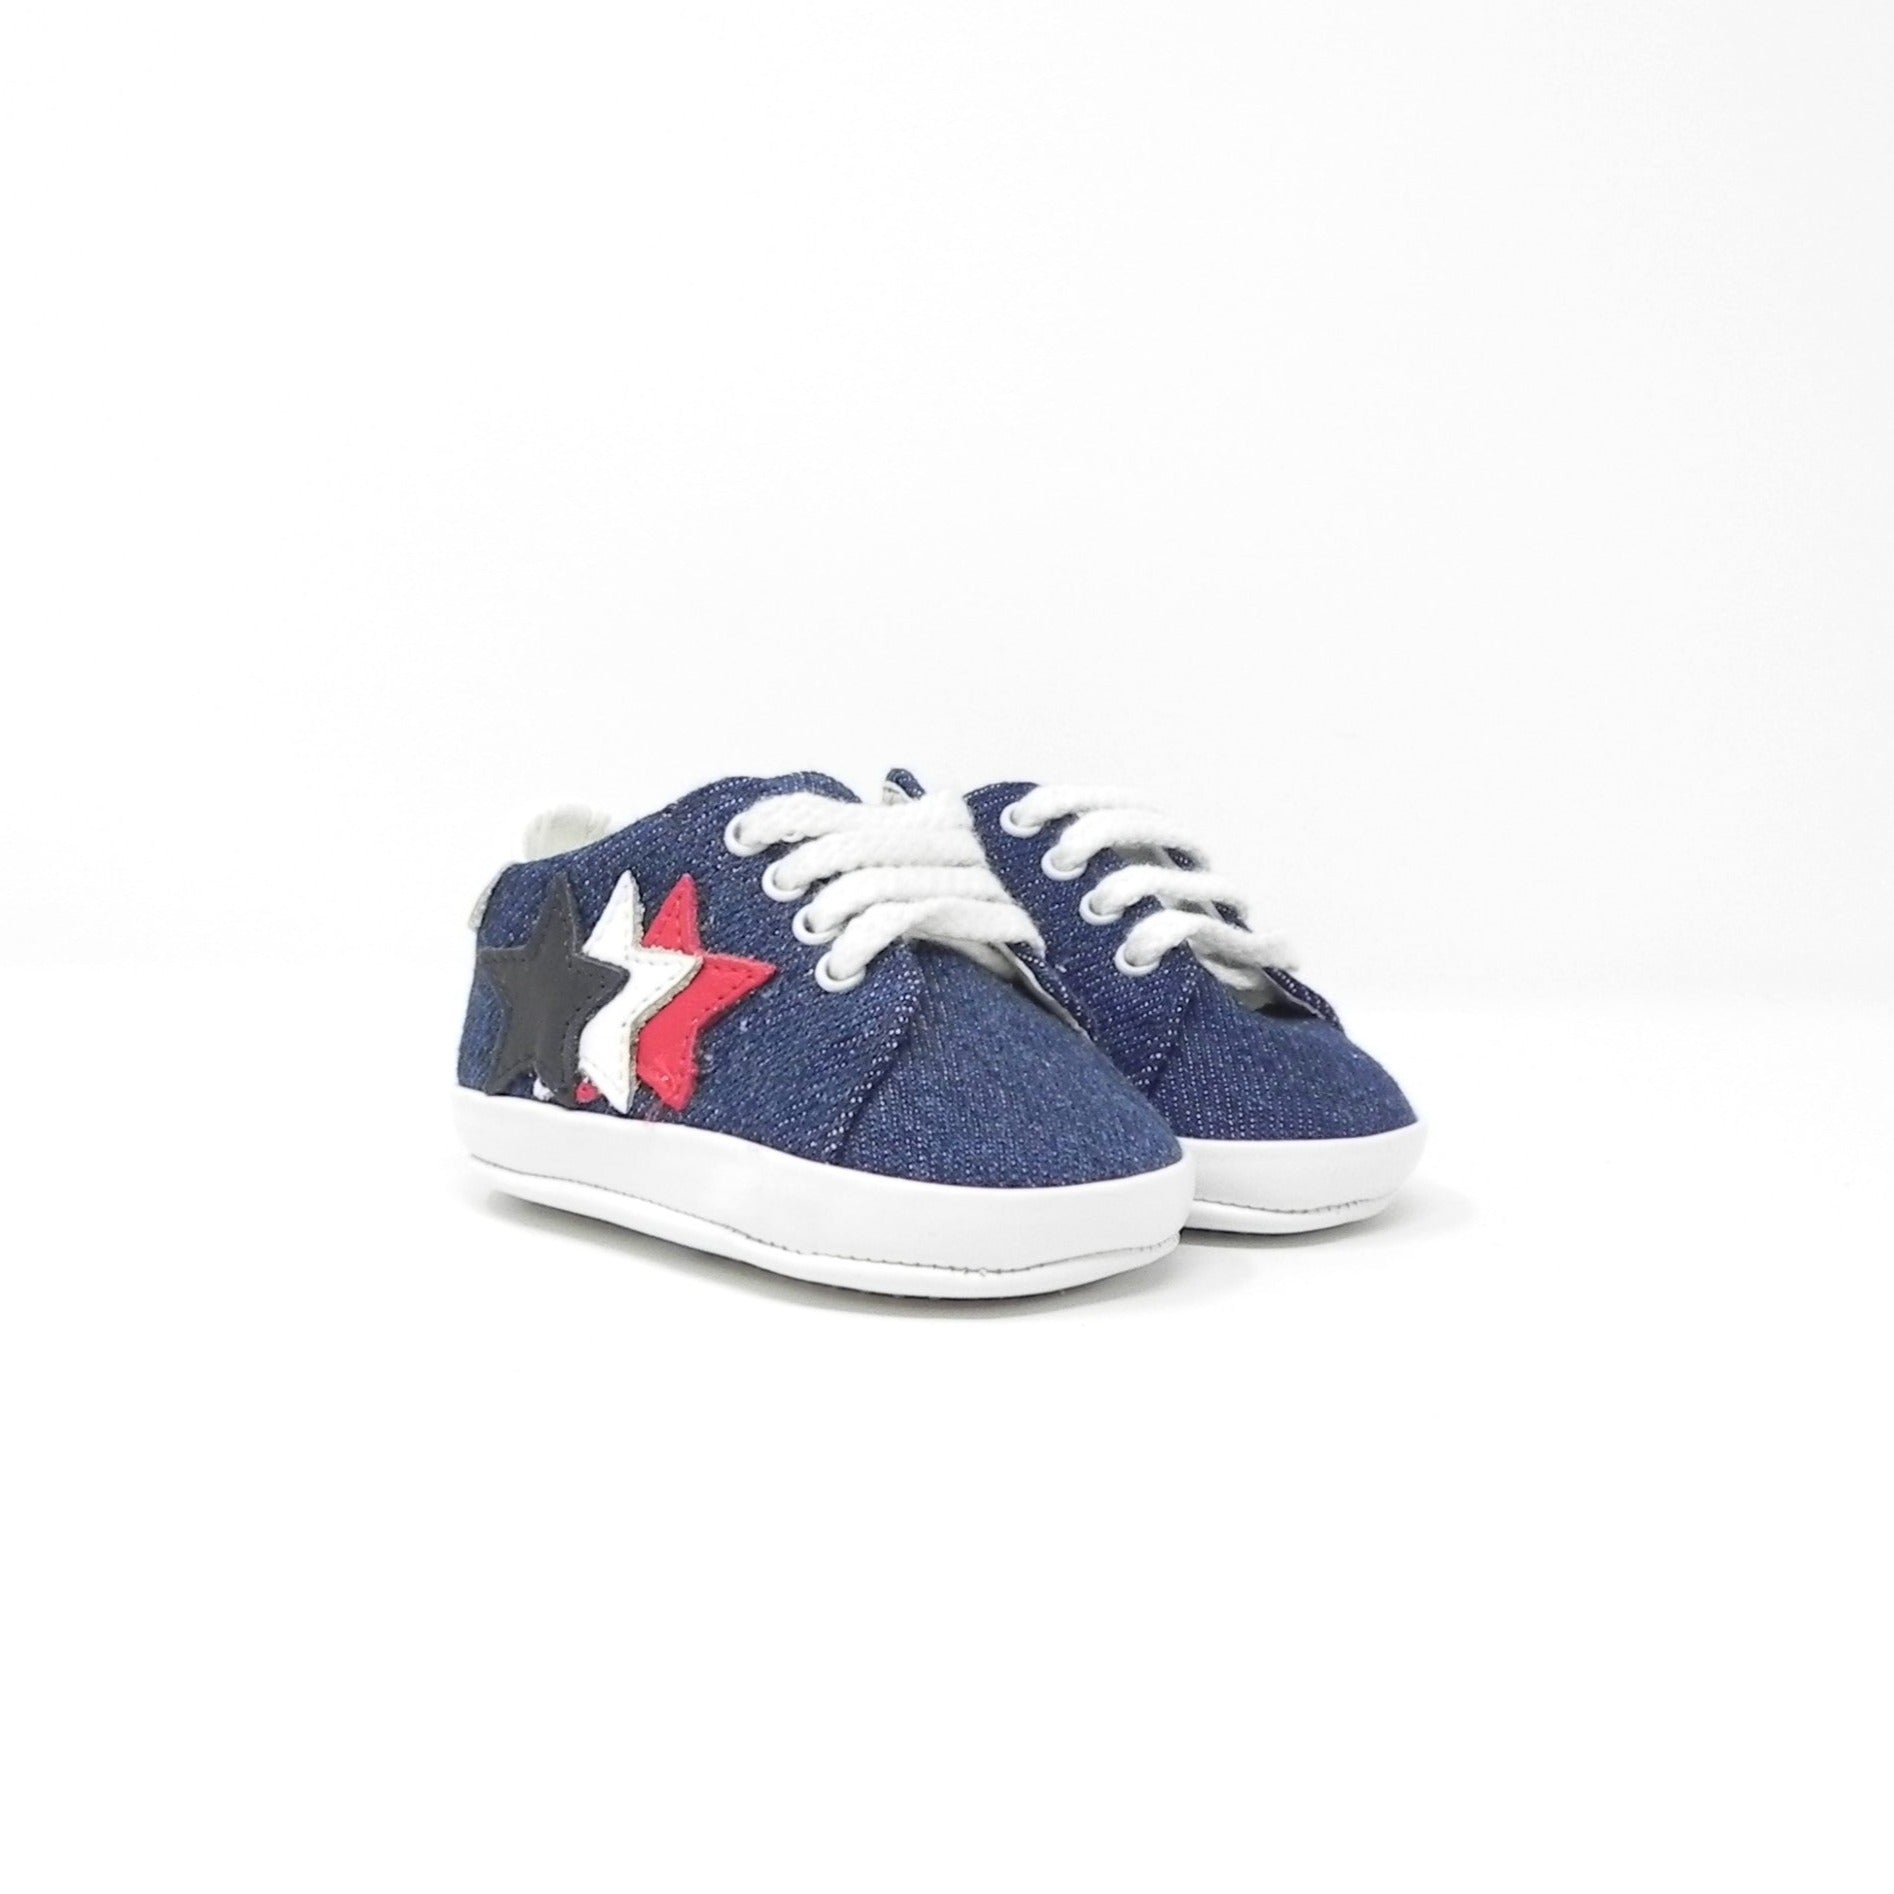 BABY CHICK - Sneakers Culla in pelle